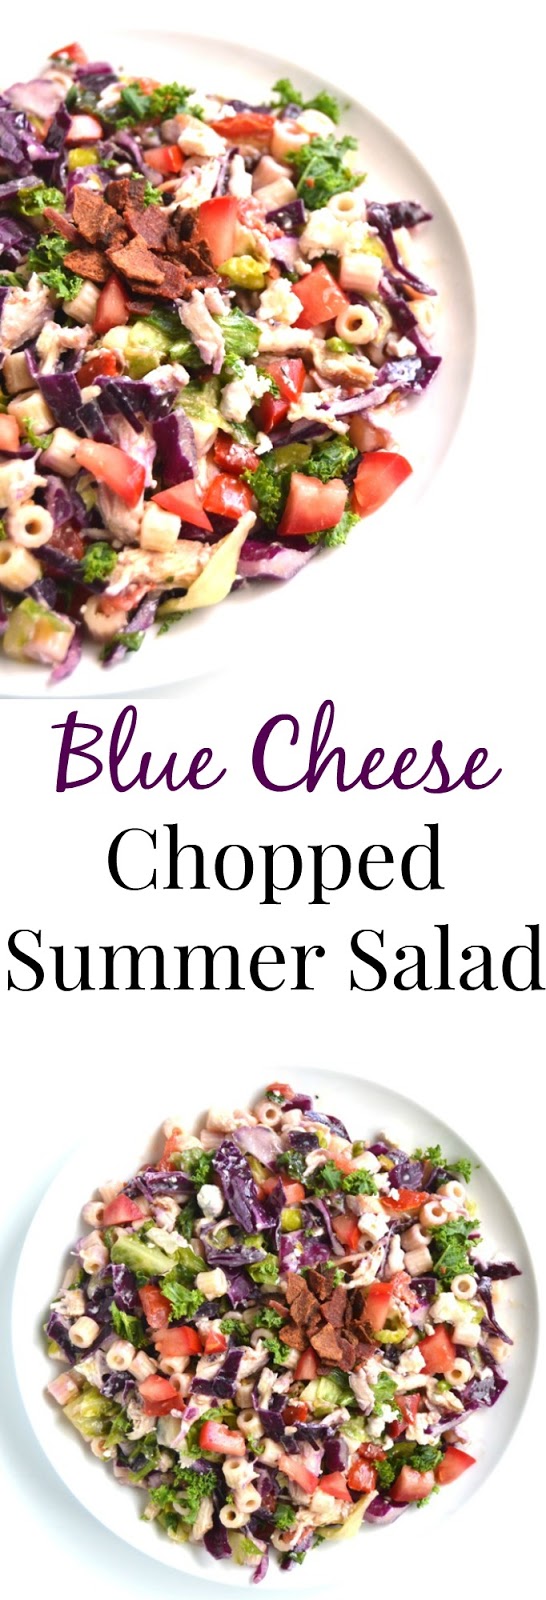 Blue Cheese Chopped Summer Salad is packed full of flavor and is the perfect salad for summer. Filled with crunchy red cabbage, creamy blue cheese and bacon, you won't be able to have just one bowl. www.nutritionistreviews.com